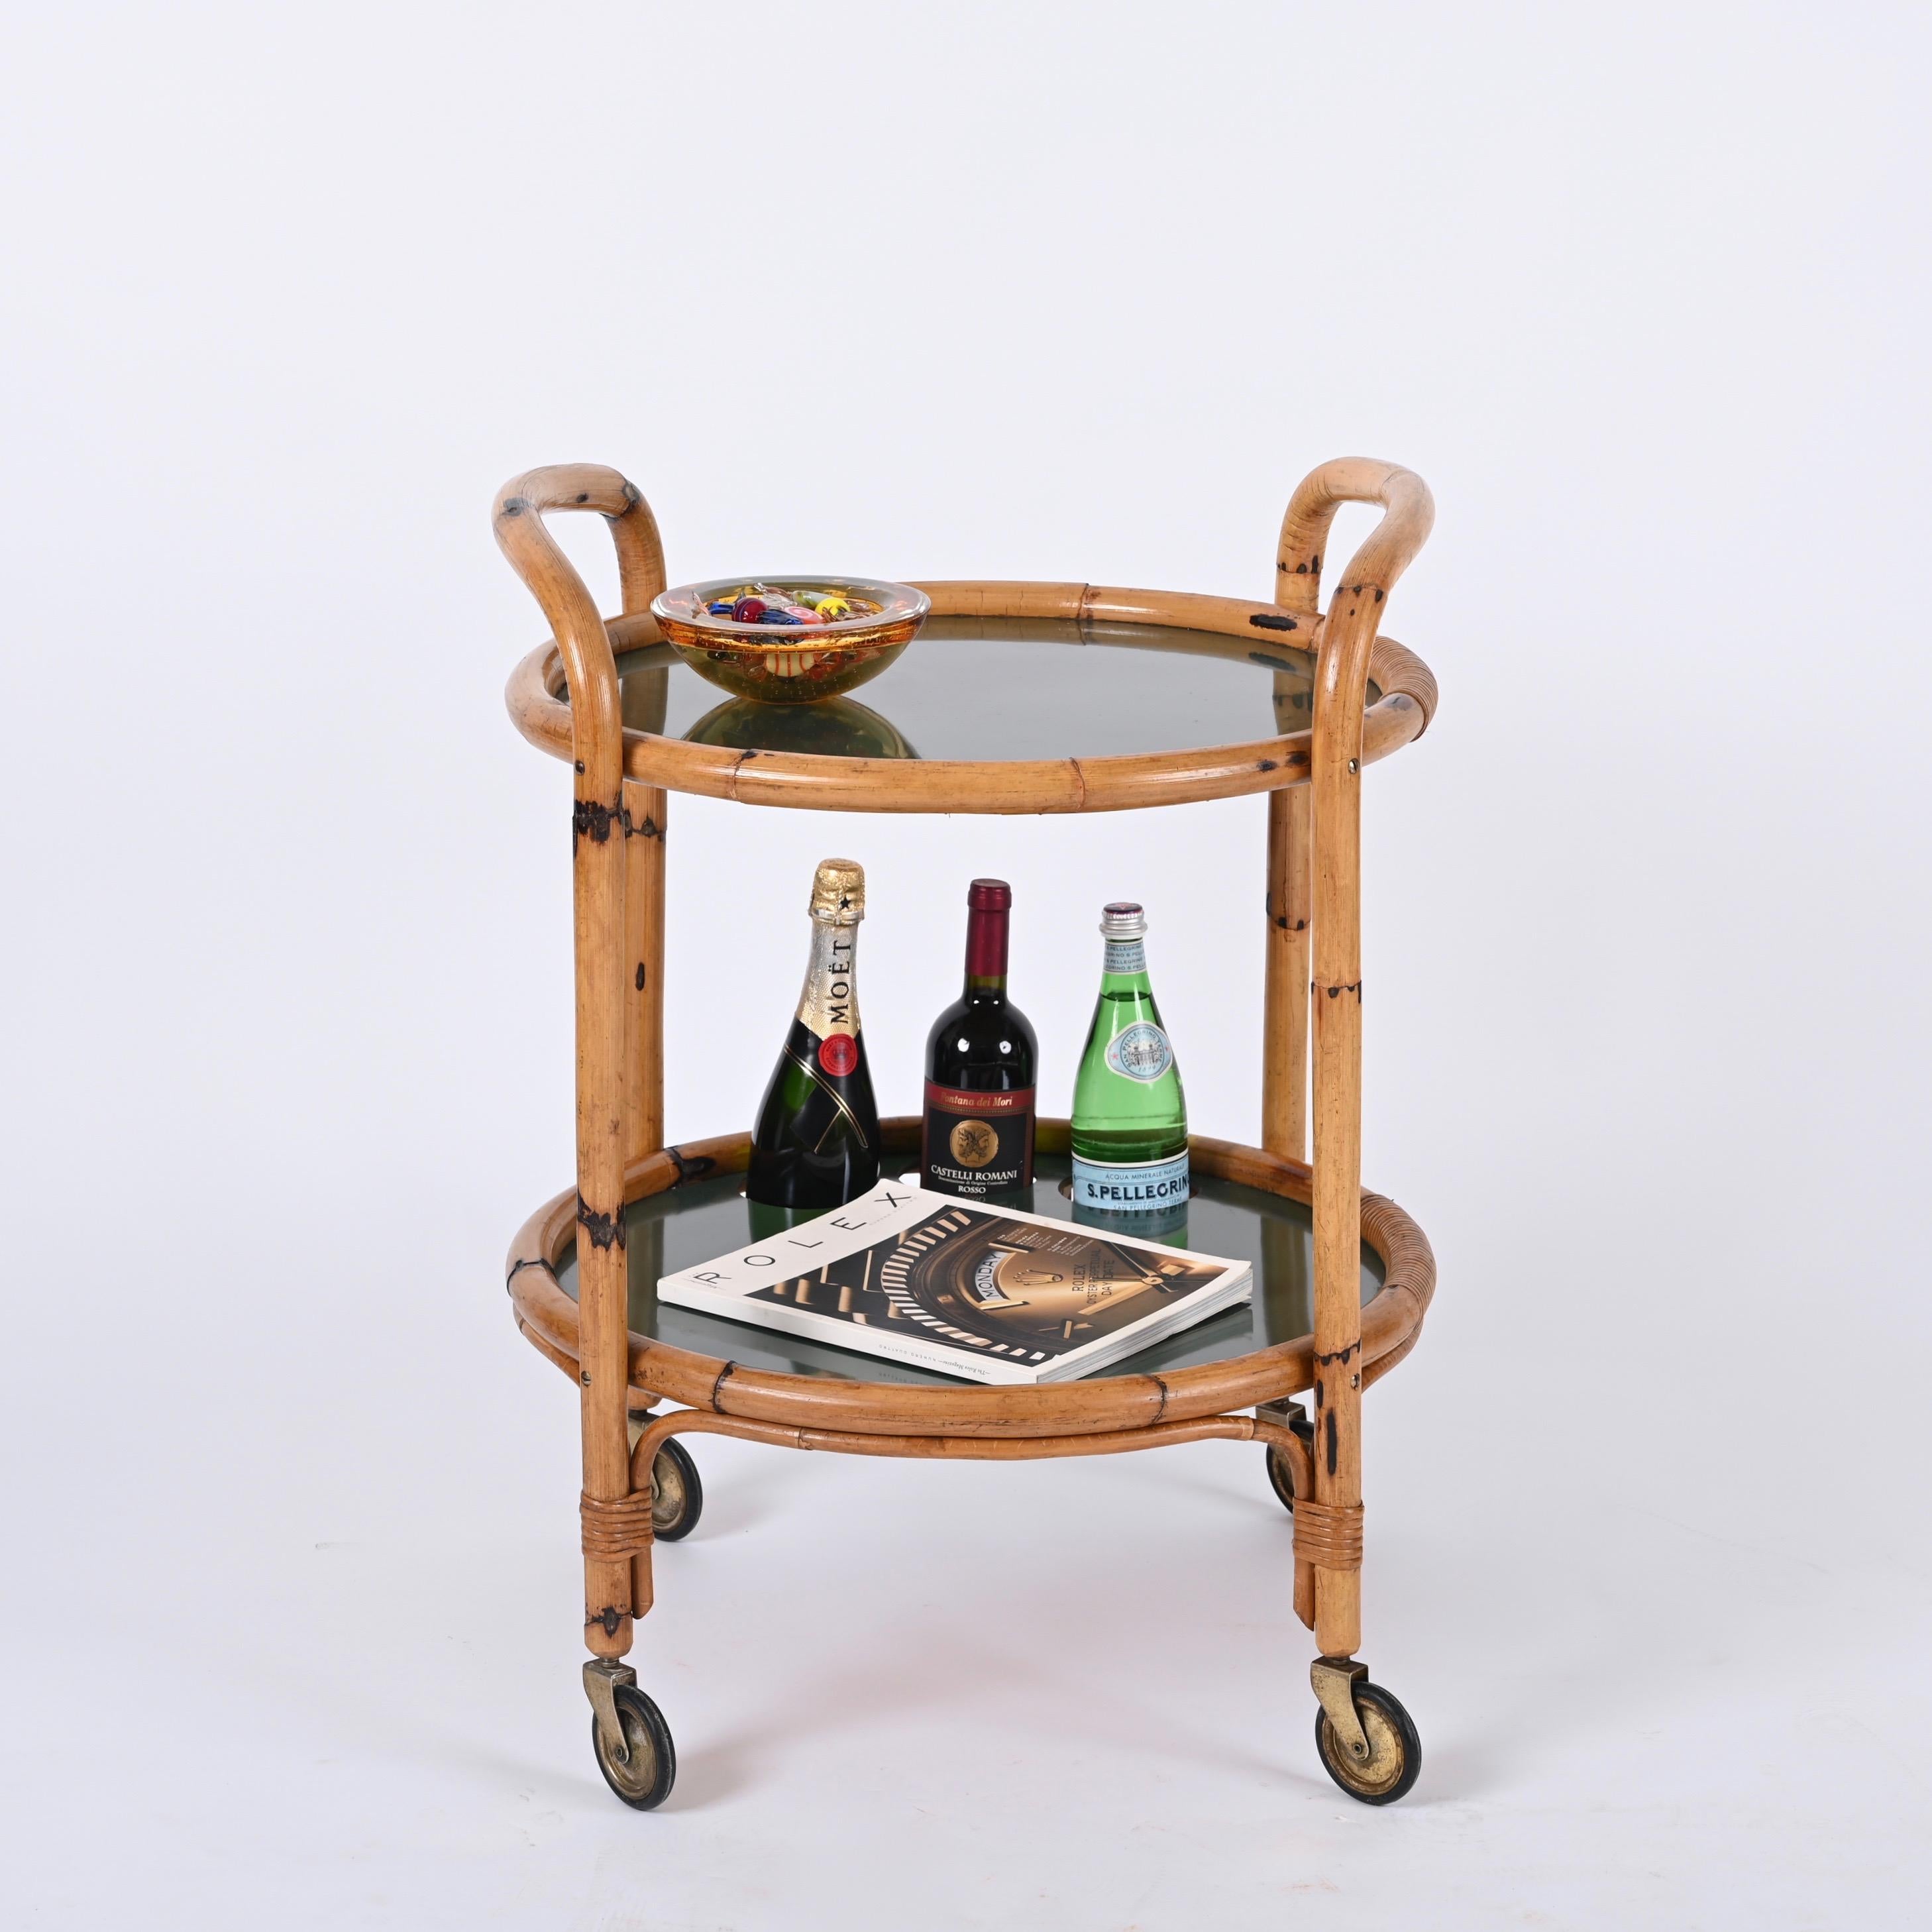 Stunning midcentury round serving cart in bamboo, rattan and green formica. This unique piece was produced in Italy in the 1970s.

The bar cart features a beautiful structure made in curved bamboo with curved handles and two levels in a charming